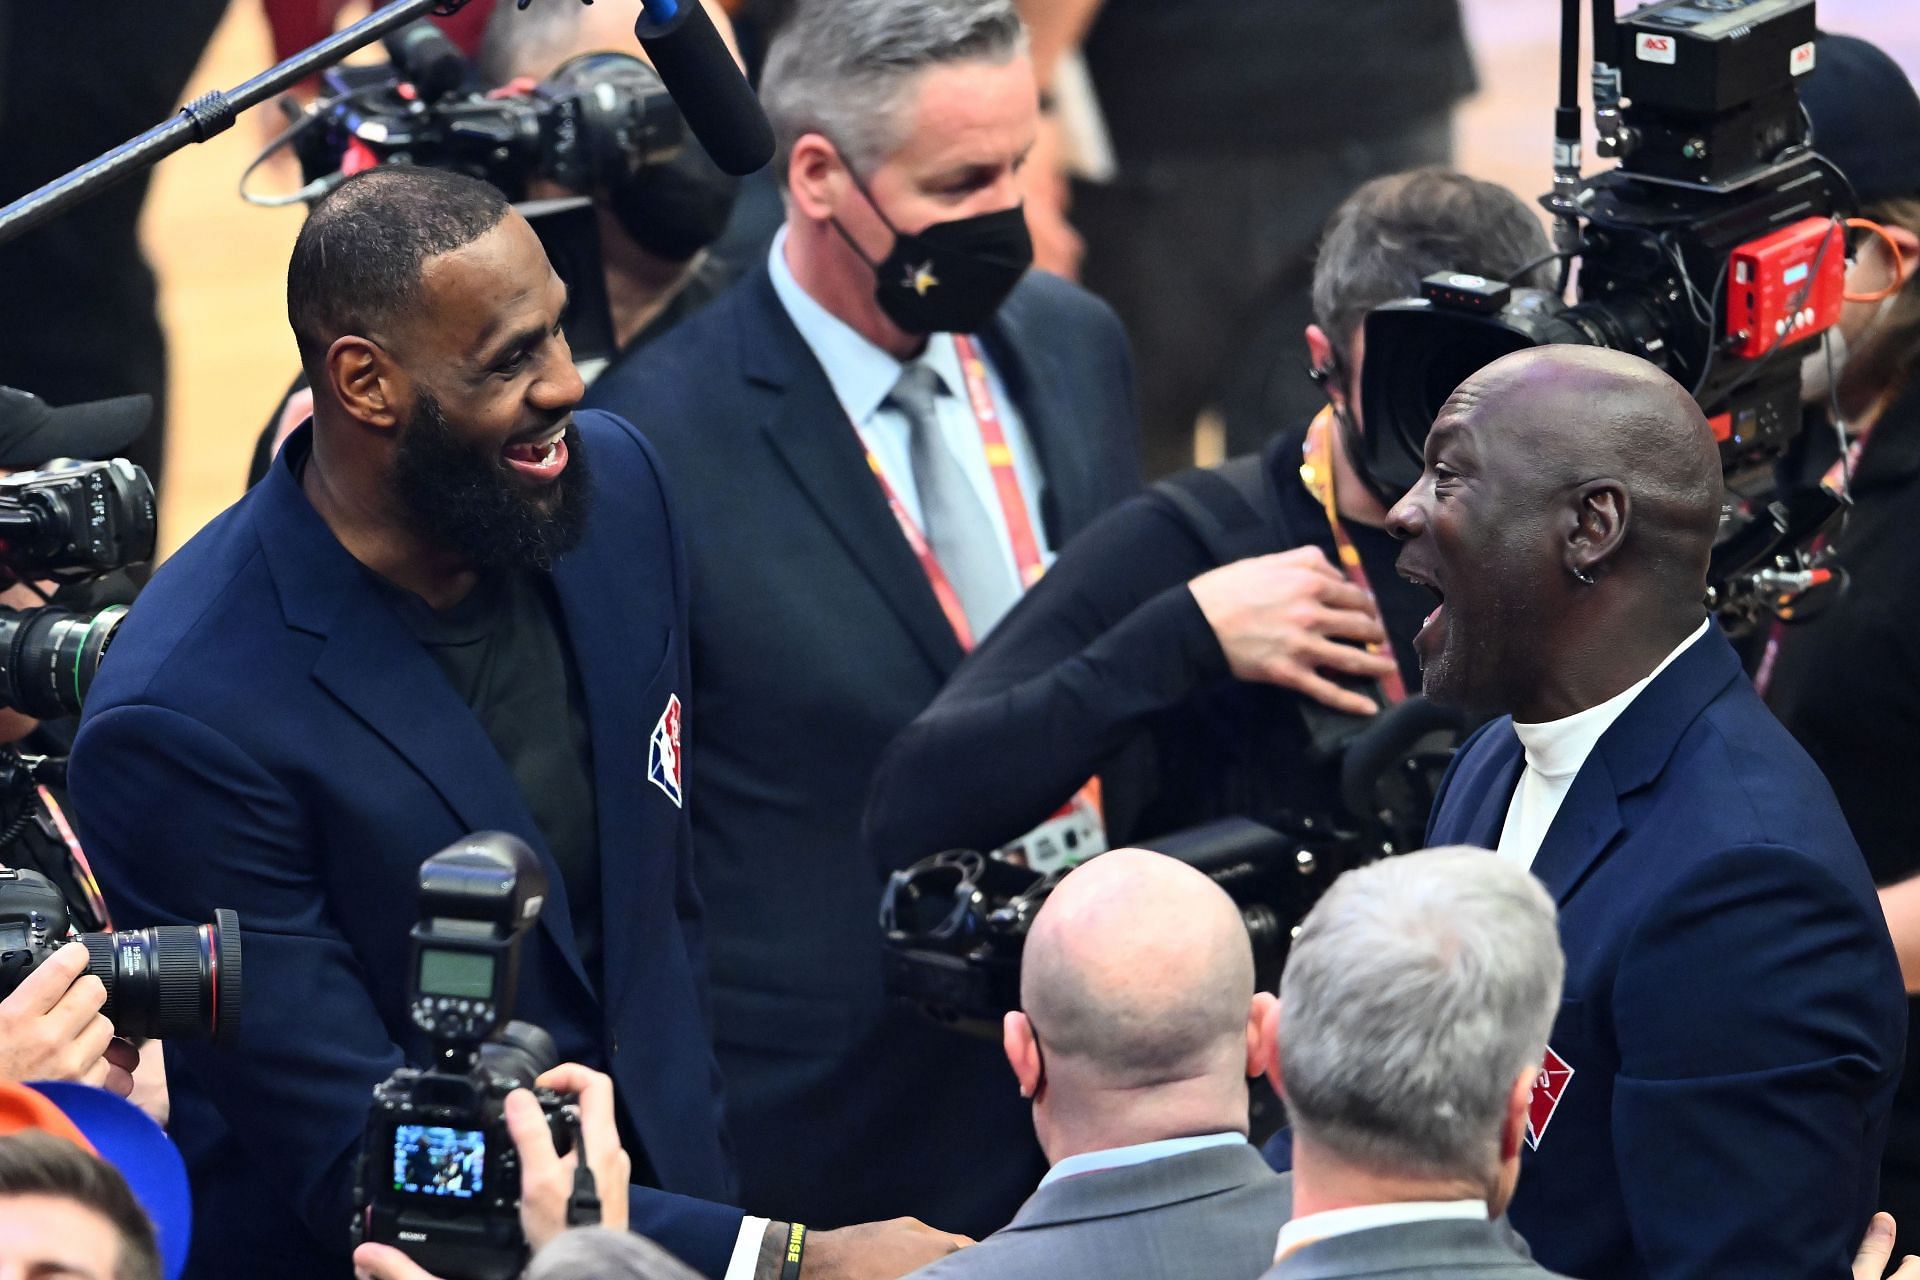 2022 All-Star Game. Michael Jordan, right, and LeBron James talk after the presentation of the NBA 75th Anniversary Team.